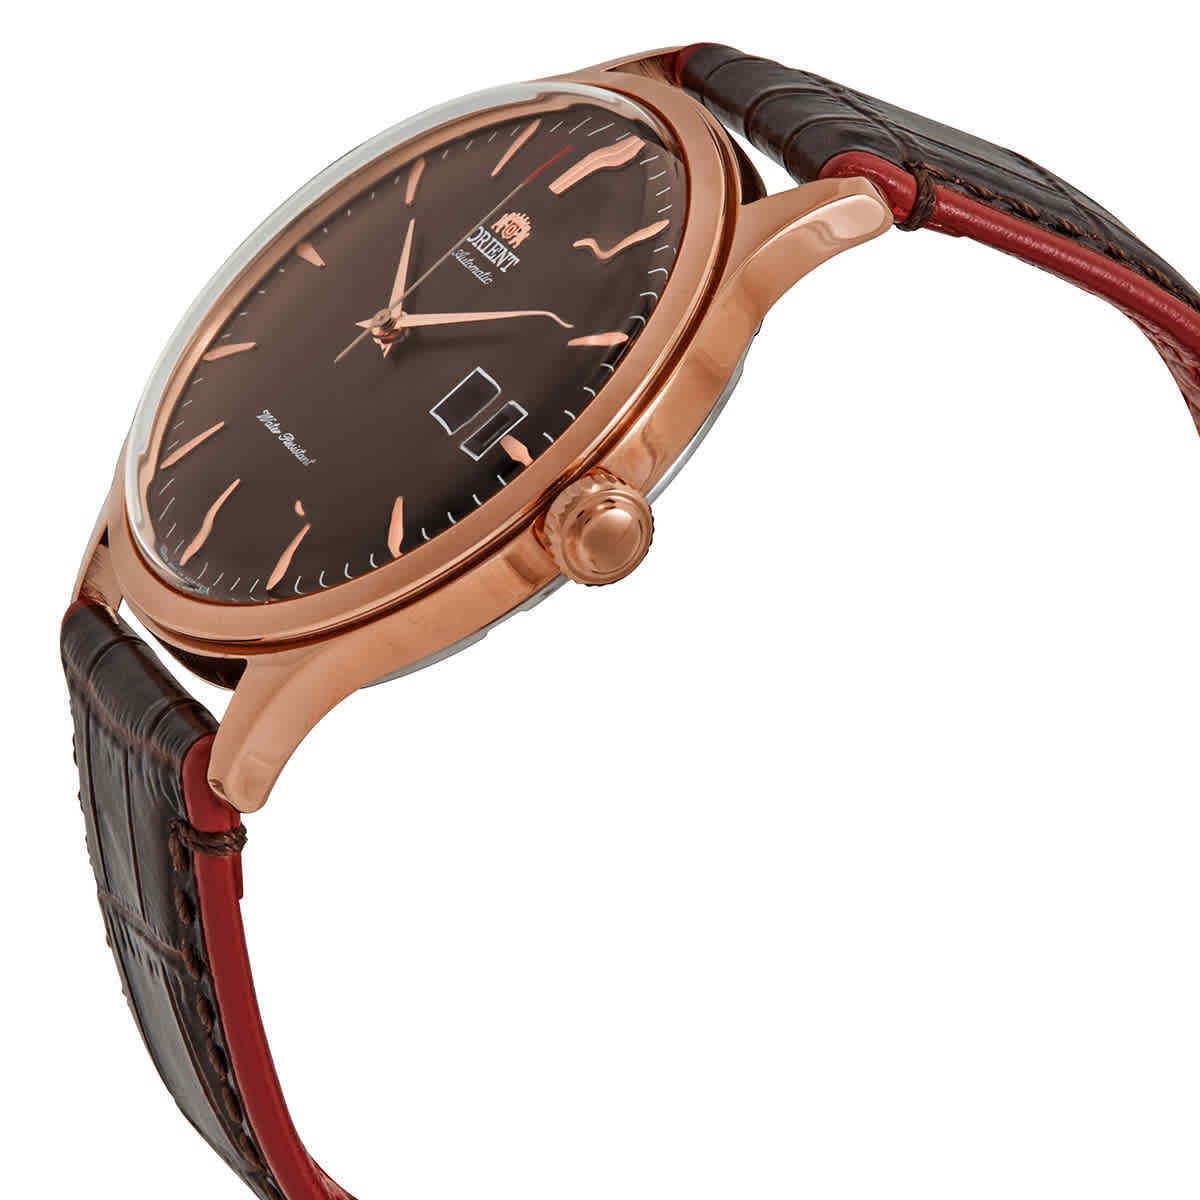 Orient Bambino Version 4 Automatic Brown Dial Men`s Watch FAC08001T0